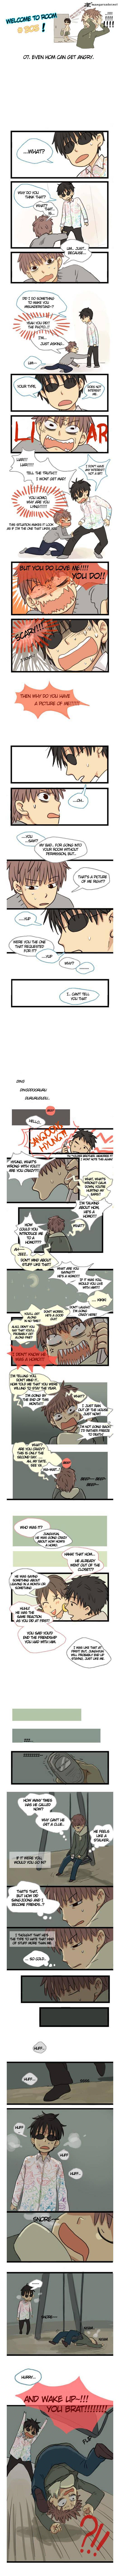 Welcome To Room 305 Chapter 7 Page 2